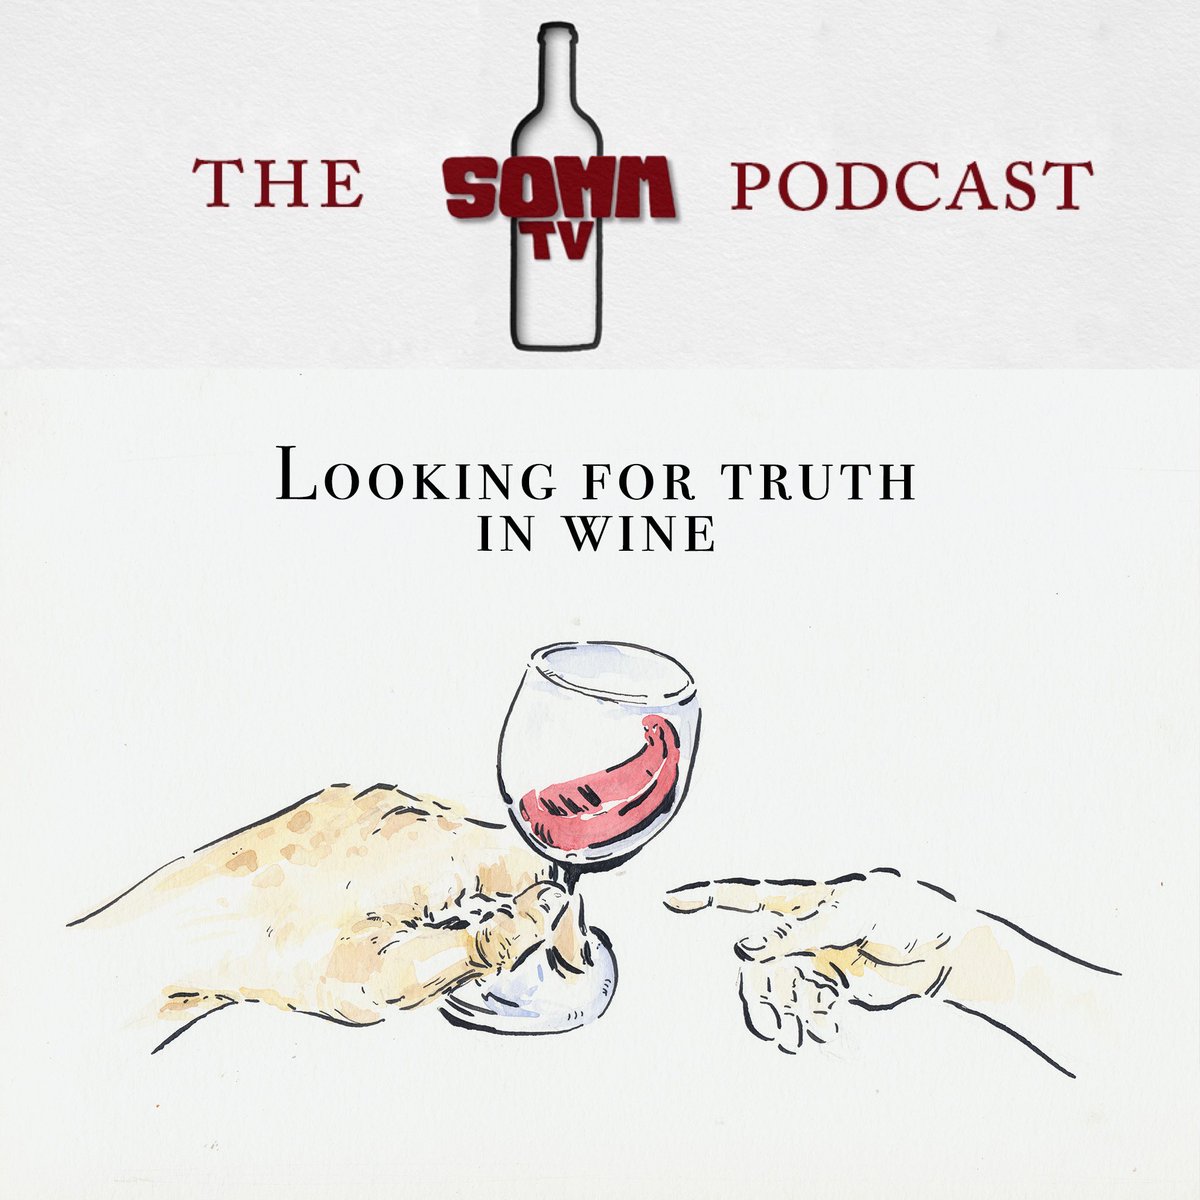 Brand new podcast with esteemed author and Harvard Professor Steven Shapin. Let’s cut through the BS in wine and see if there is any truth to the way we talk about it. podcasts.apple.com/us/podcast/som…